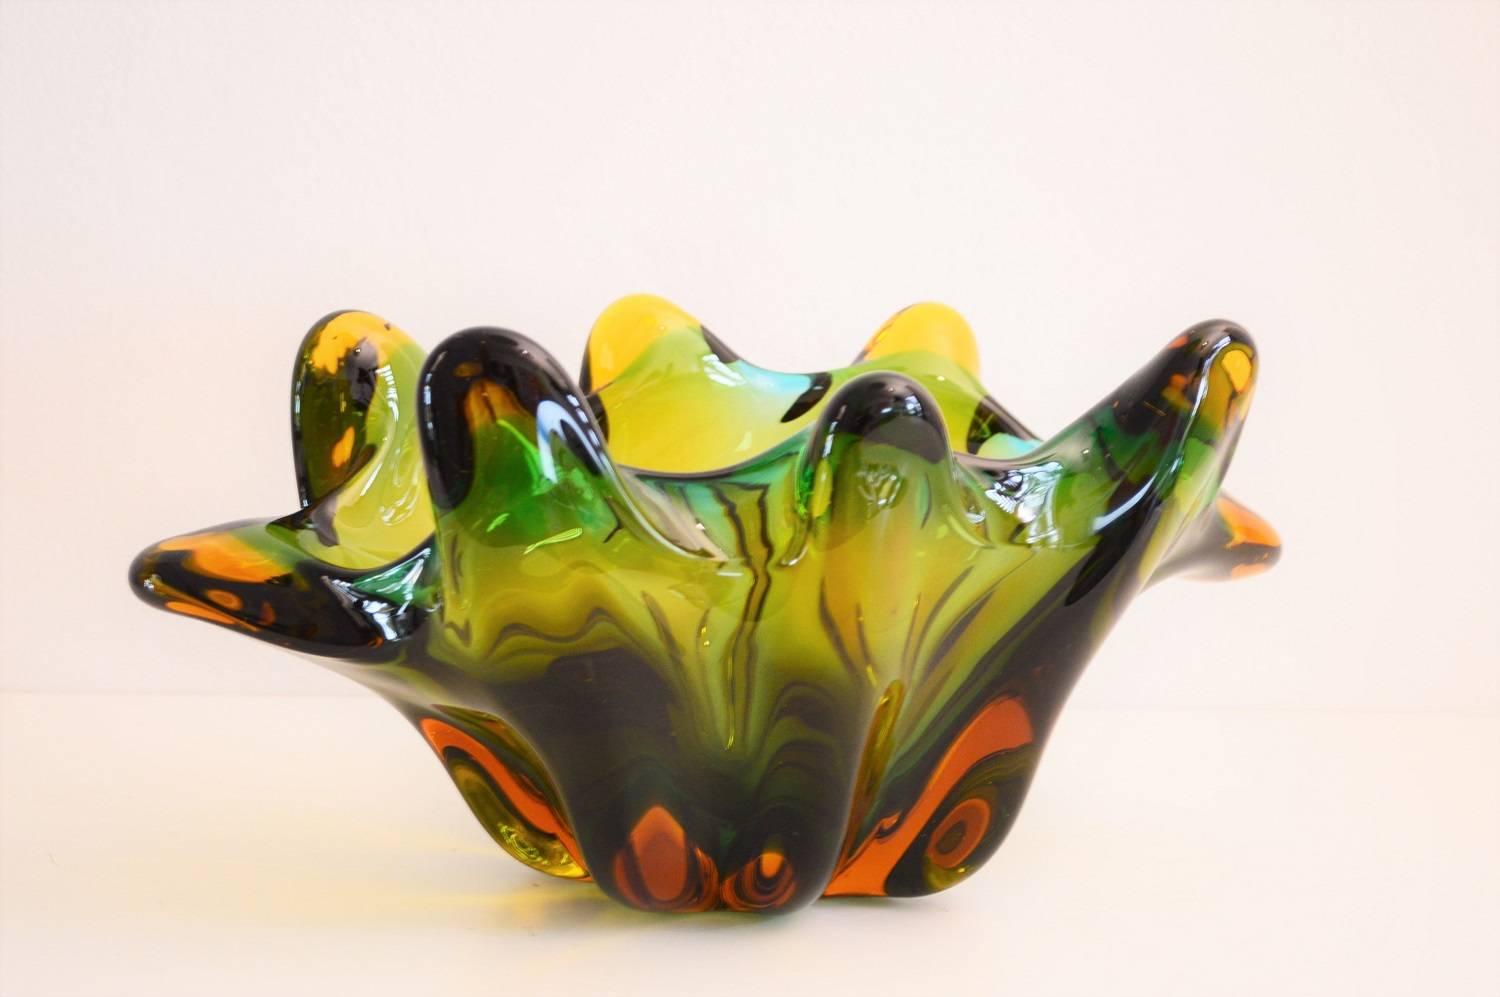 Gorgeous and heavy centerpiece of Murano art glass in green - blue - amber-yellow and brown shiny colors, which differ depending on the light and position.
The bowl is a real piece of art made by master's hand - and in excellent condition.
Made in